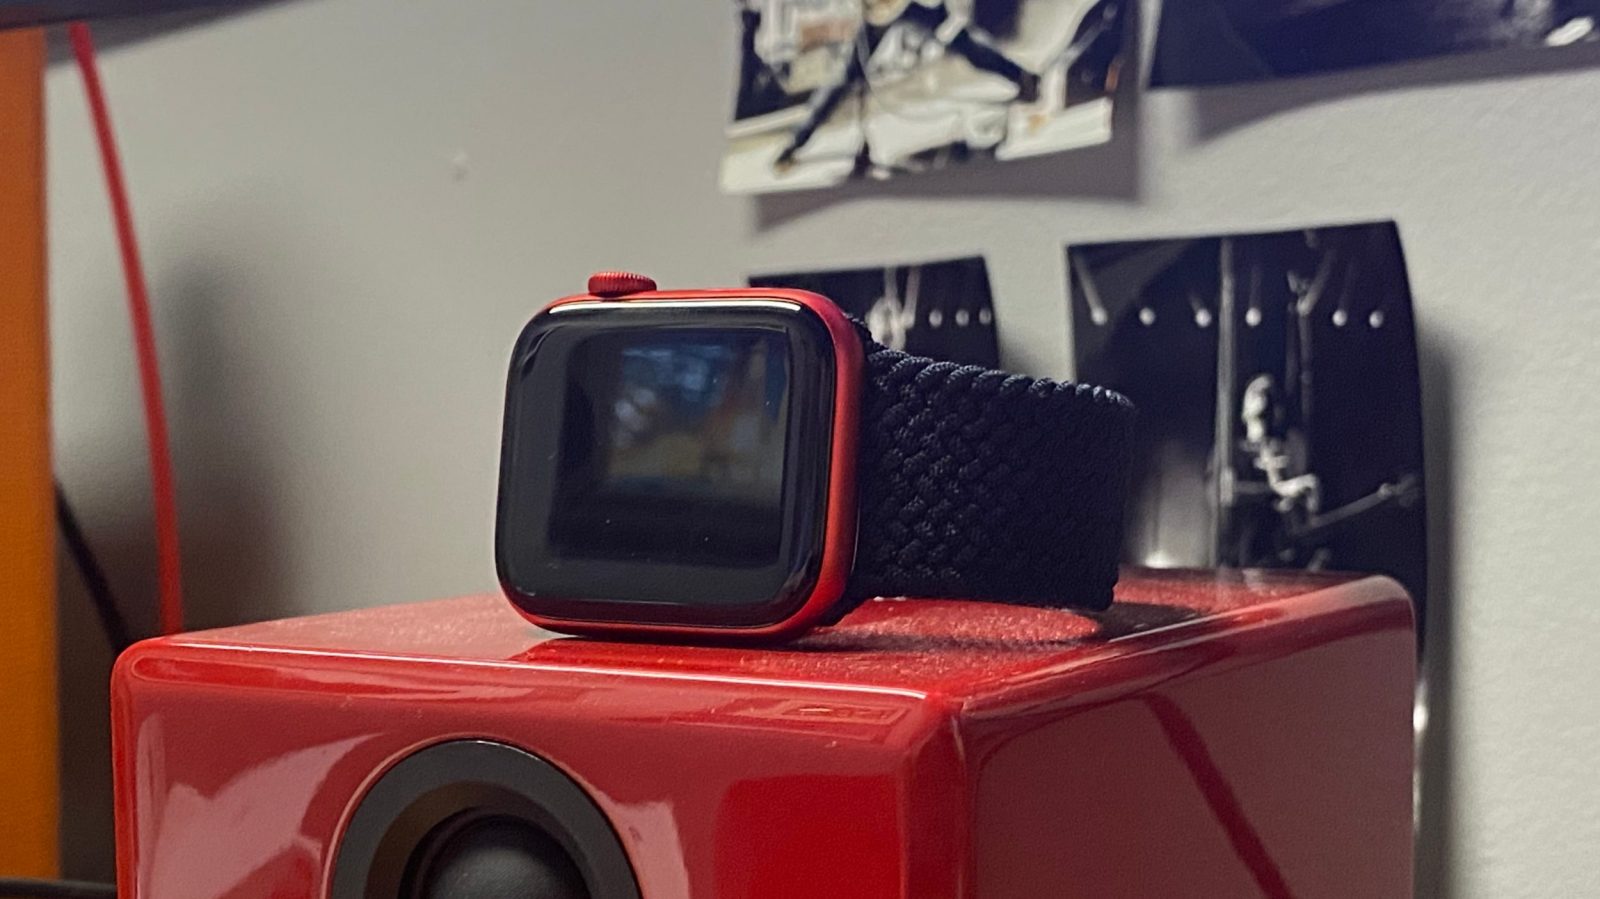 Apple-Watch-Series-6-product-red-1